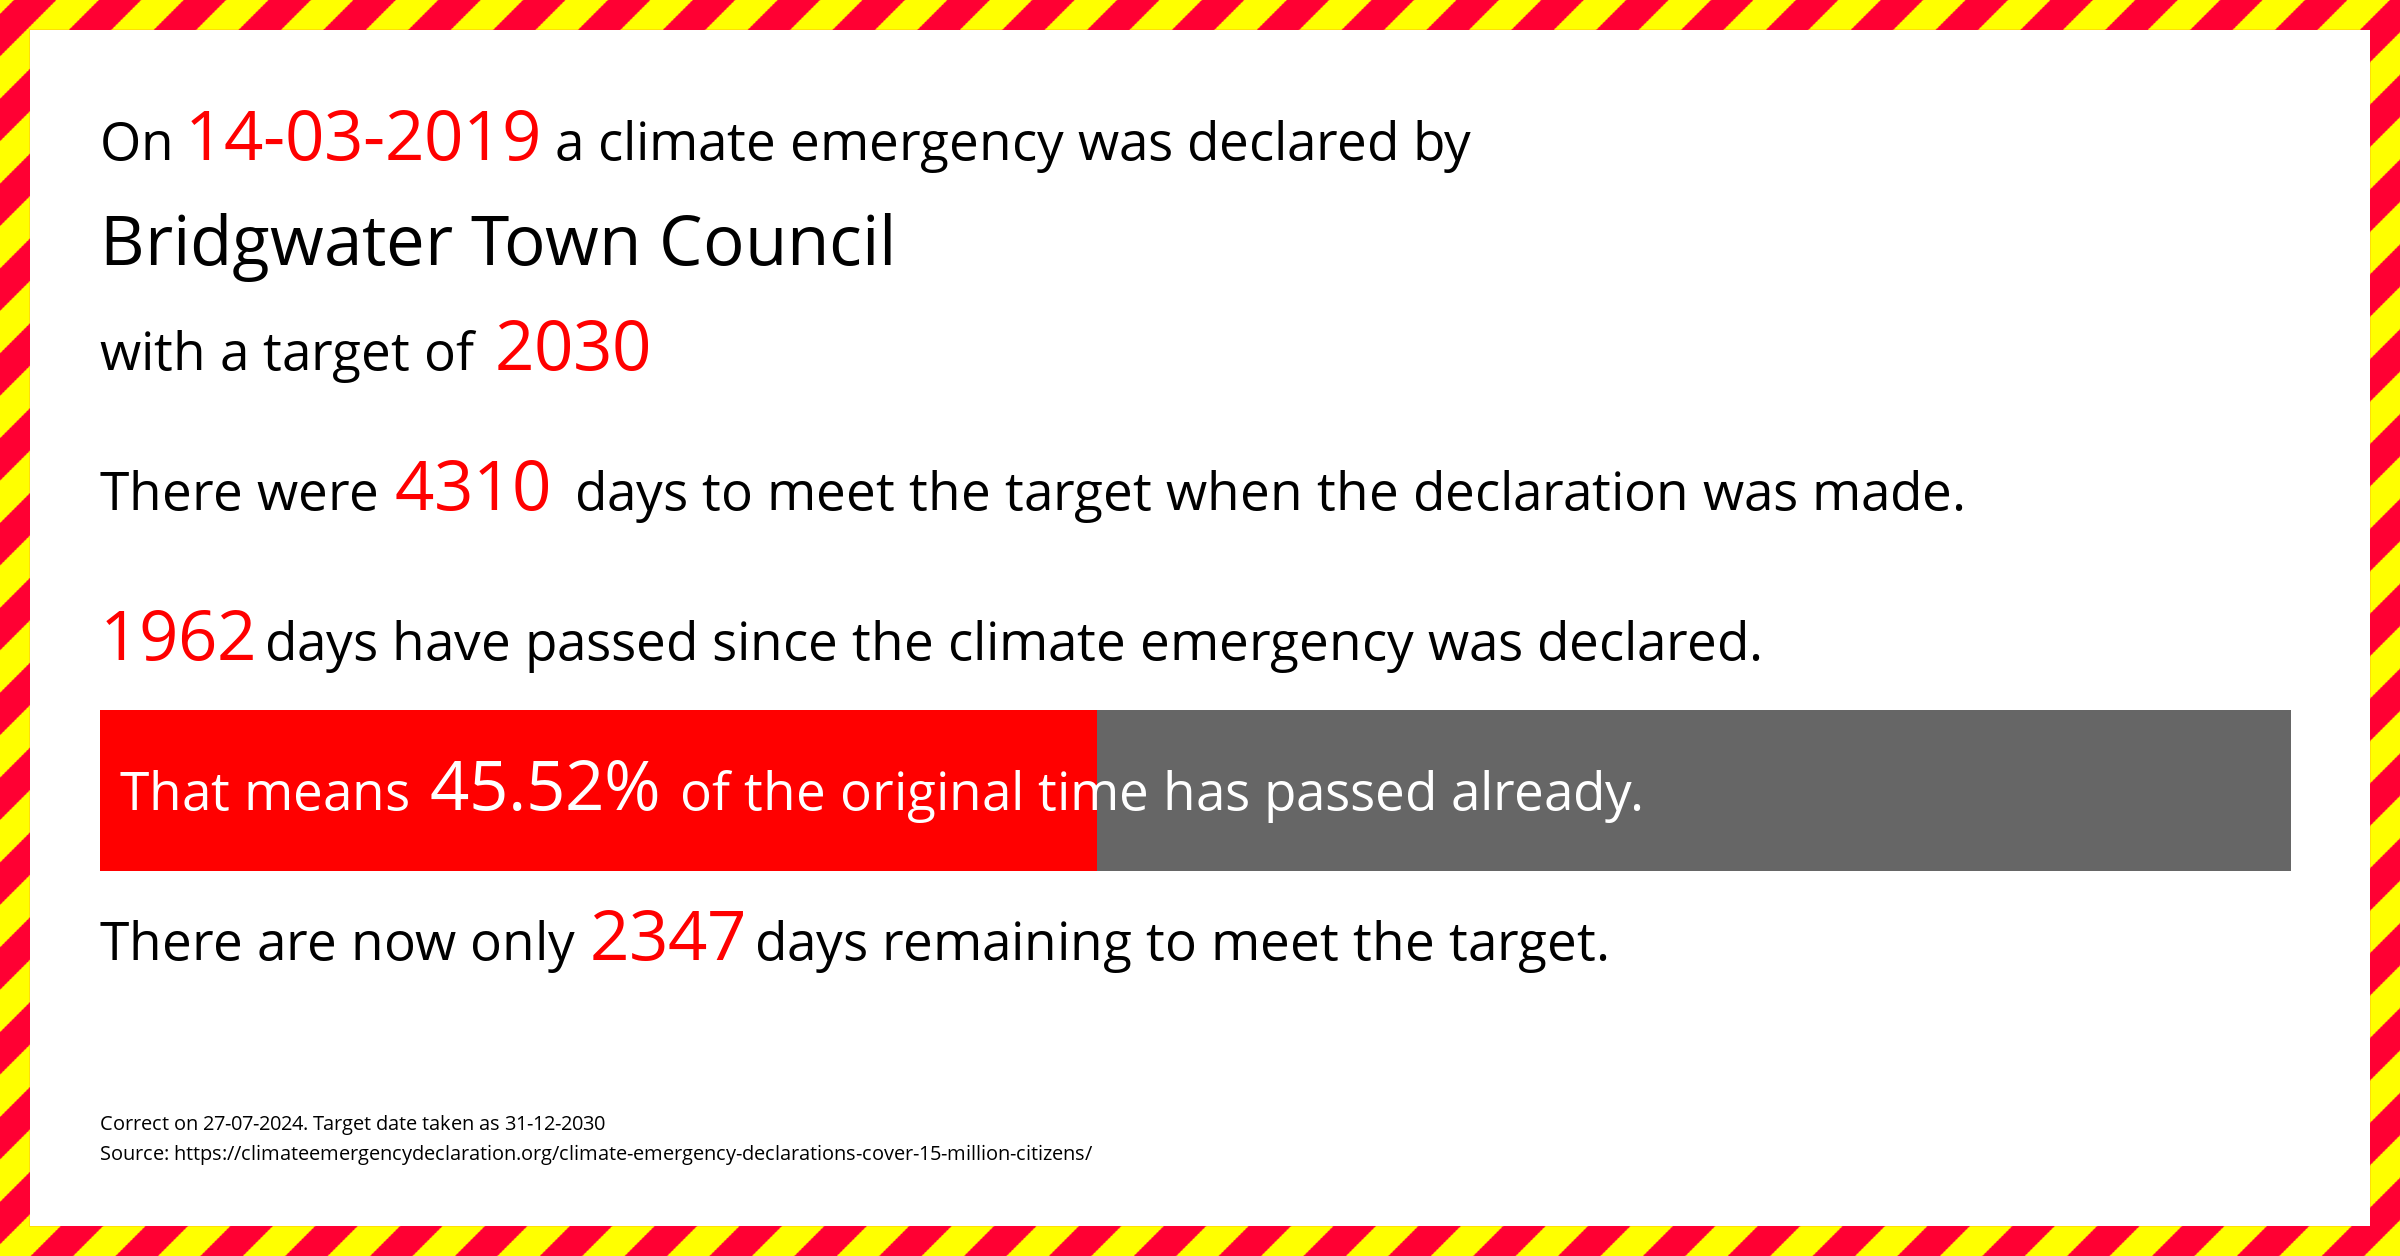 Bridgwater Town Council declared a Climate emergency on Thursday 14th March 2019, with a target of 2030.